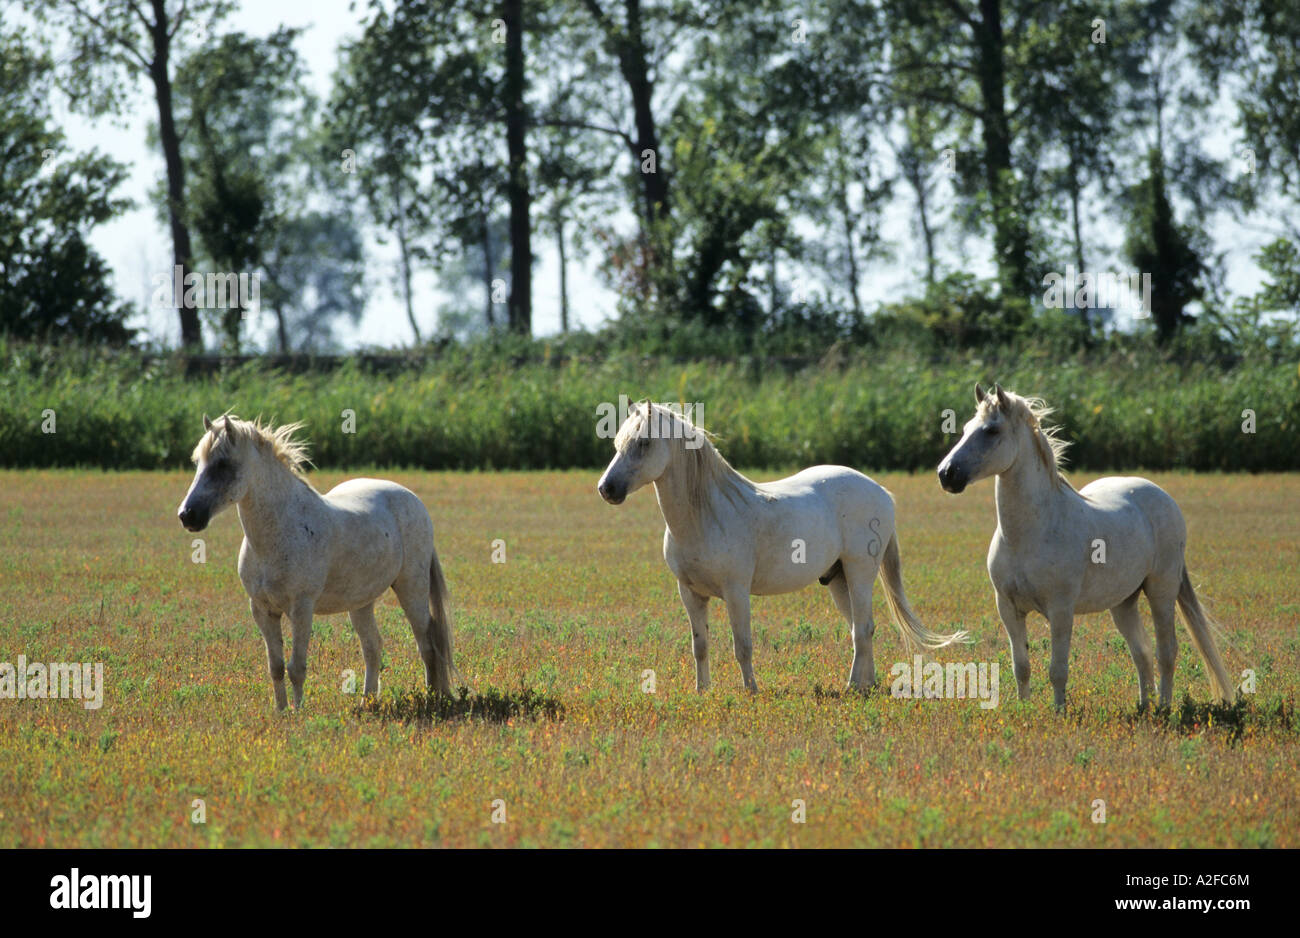 three white horses in a field Camargue horse Stock Photo